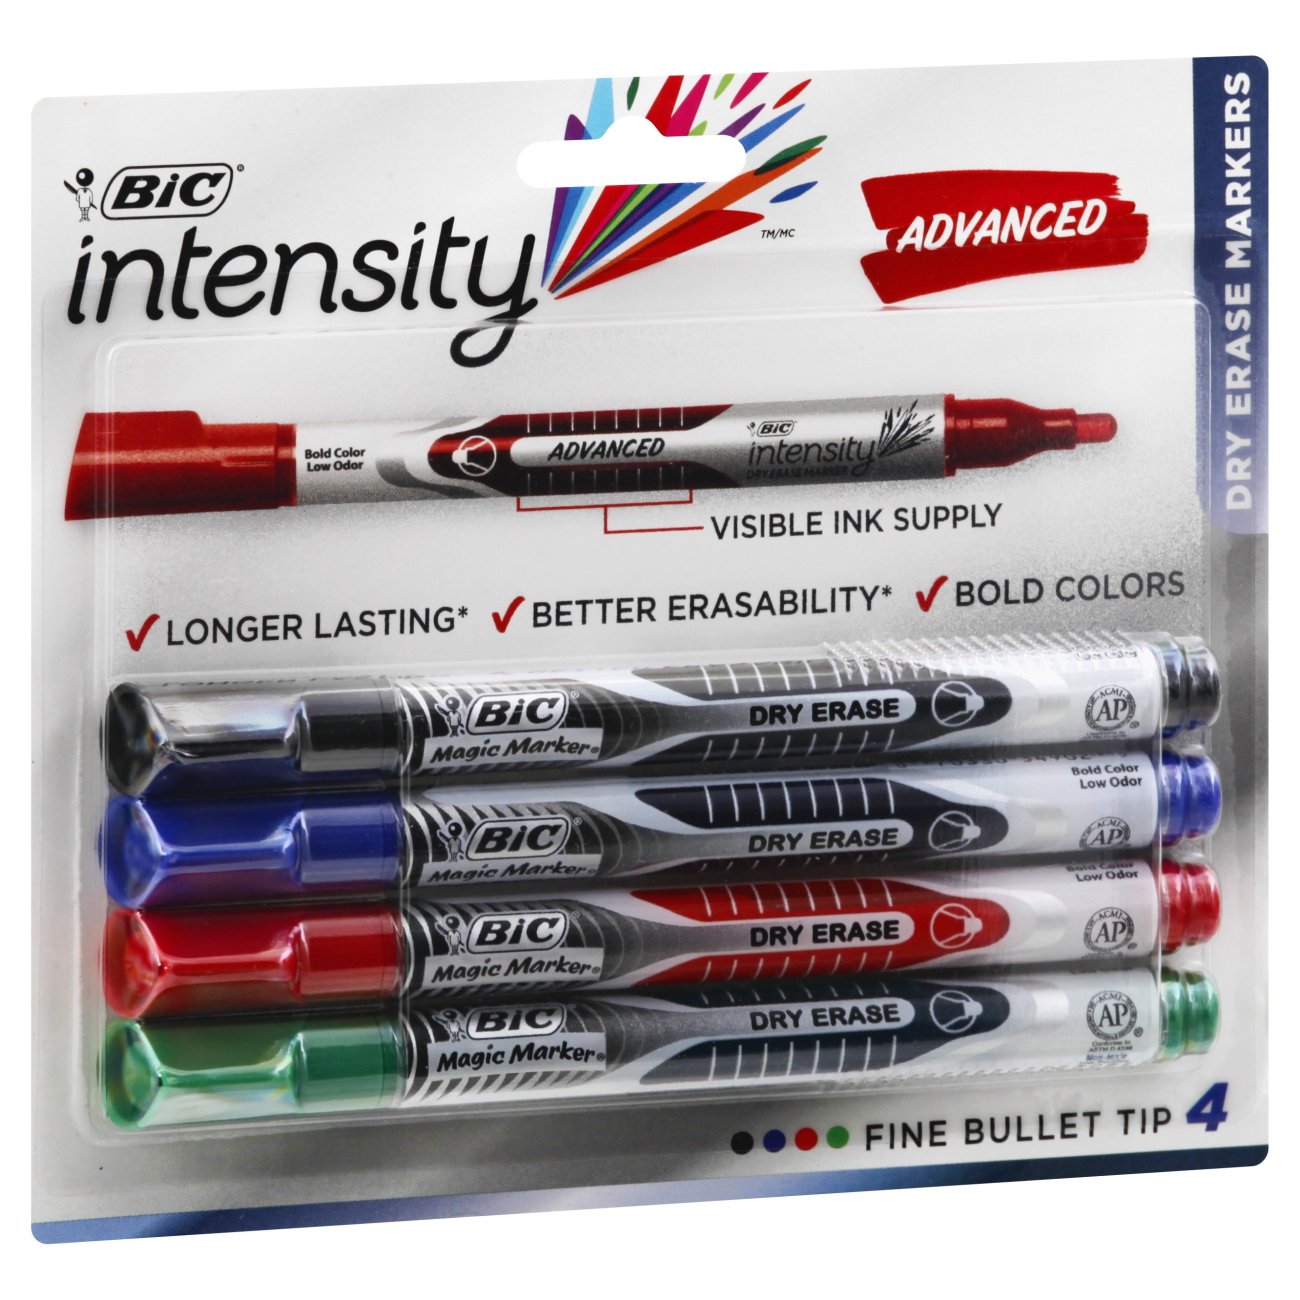 Review  BIC Magic Marker Window Markers — Craft Critique